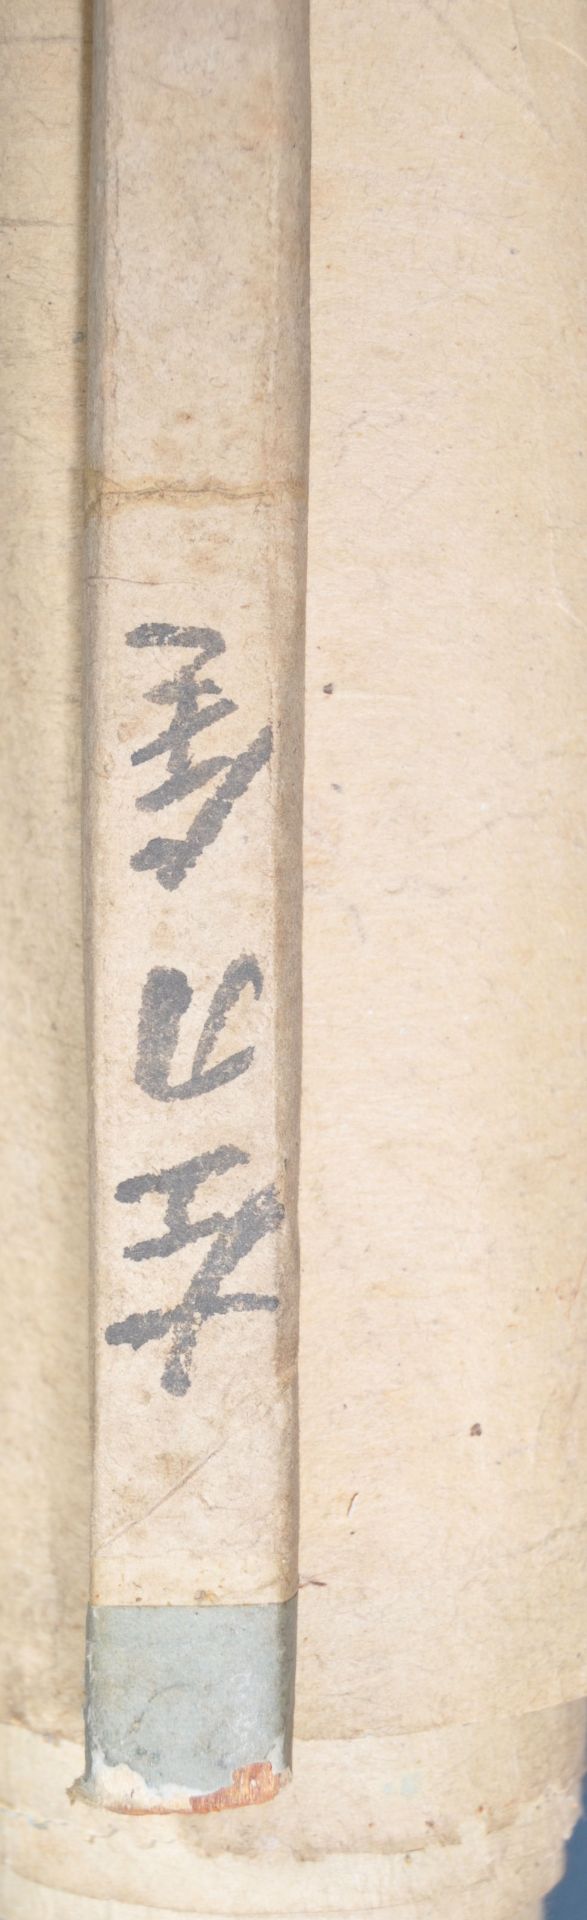 PAIR OF CHINESE HAND PAINTED EMPEROR PAPER SCROLLS - Image 5 of 8